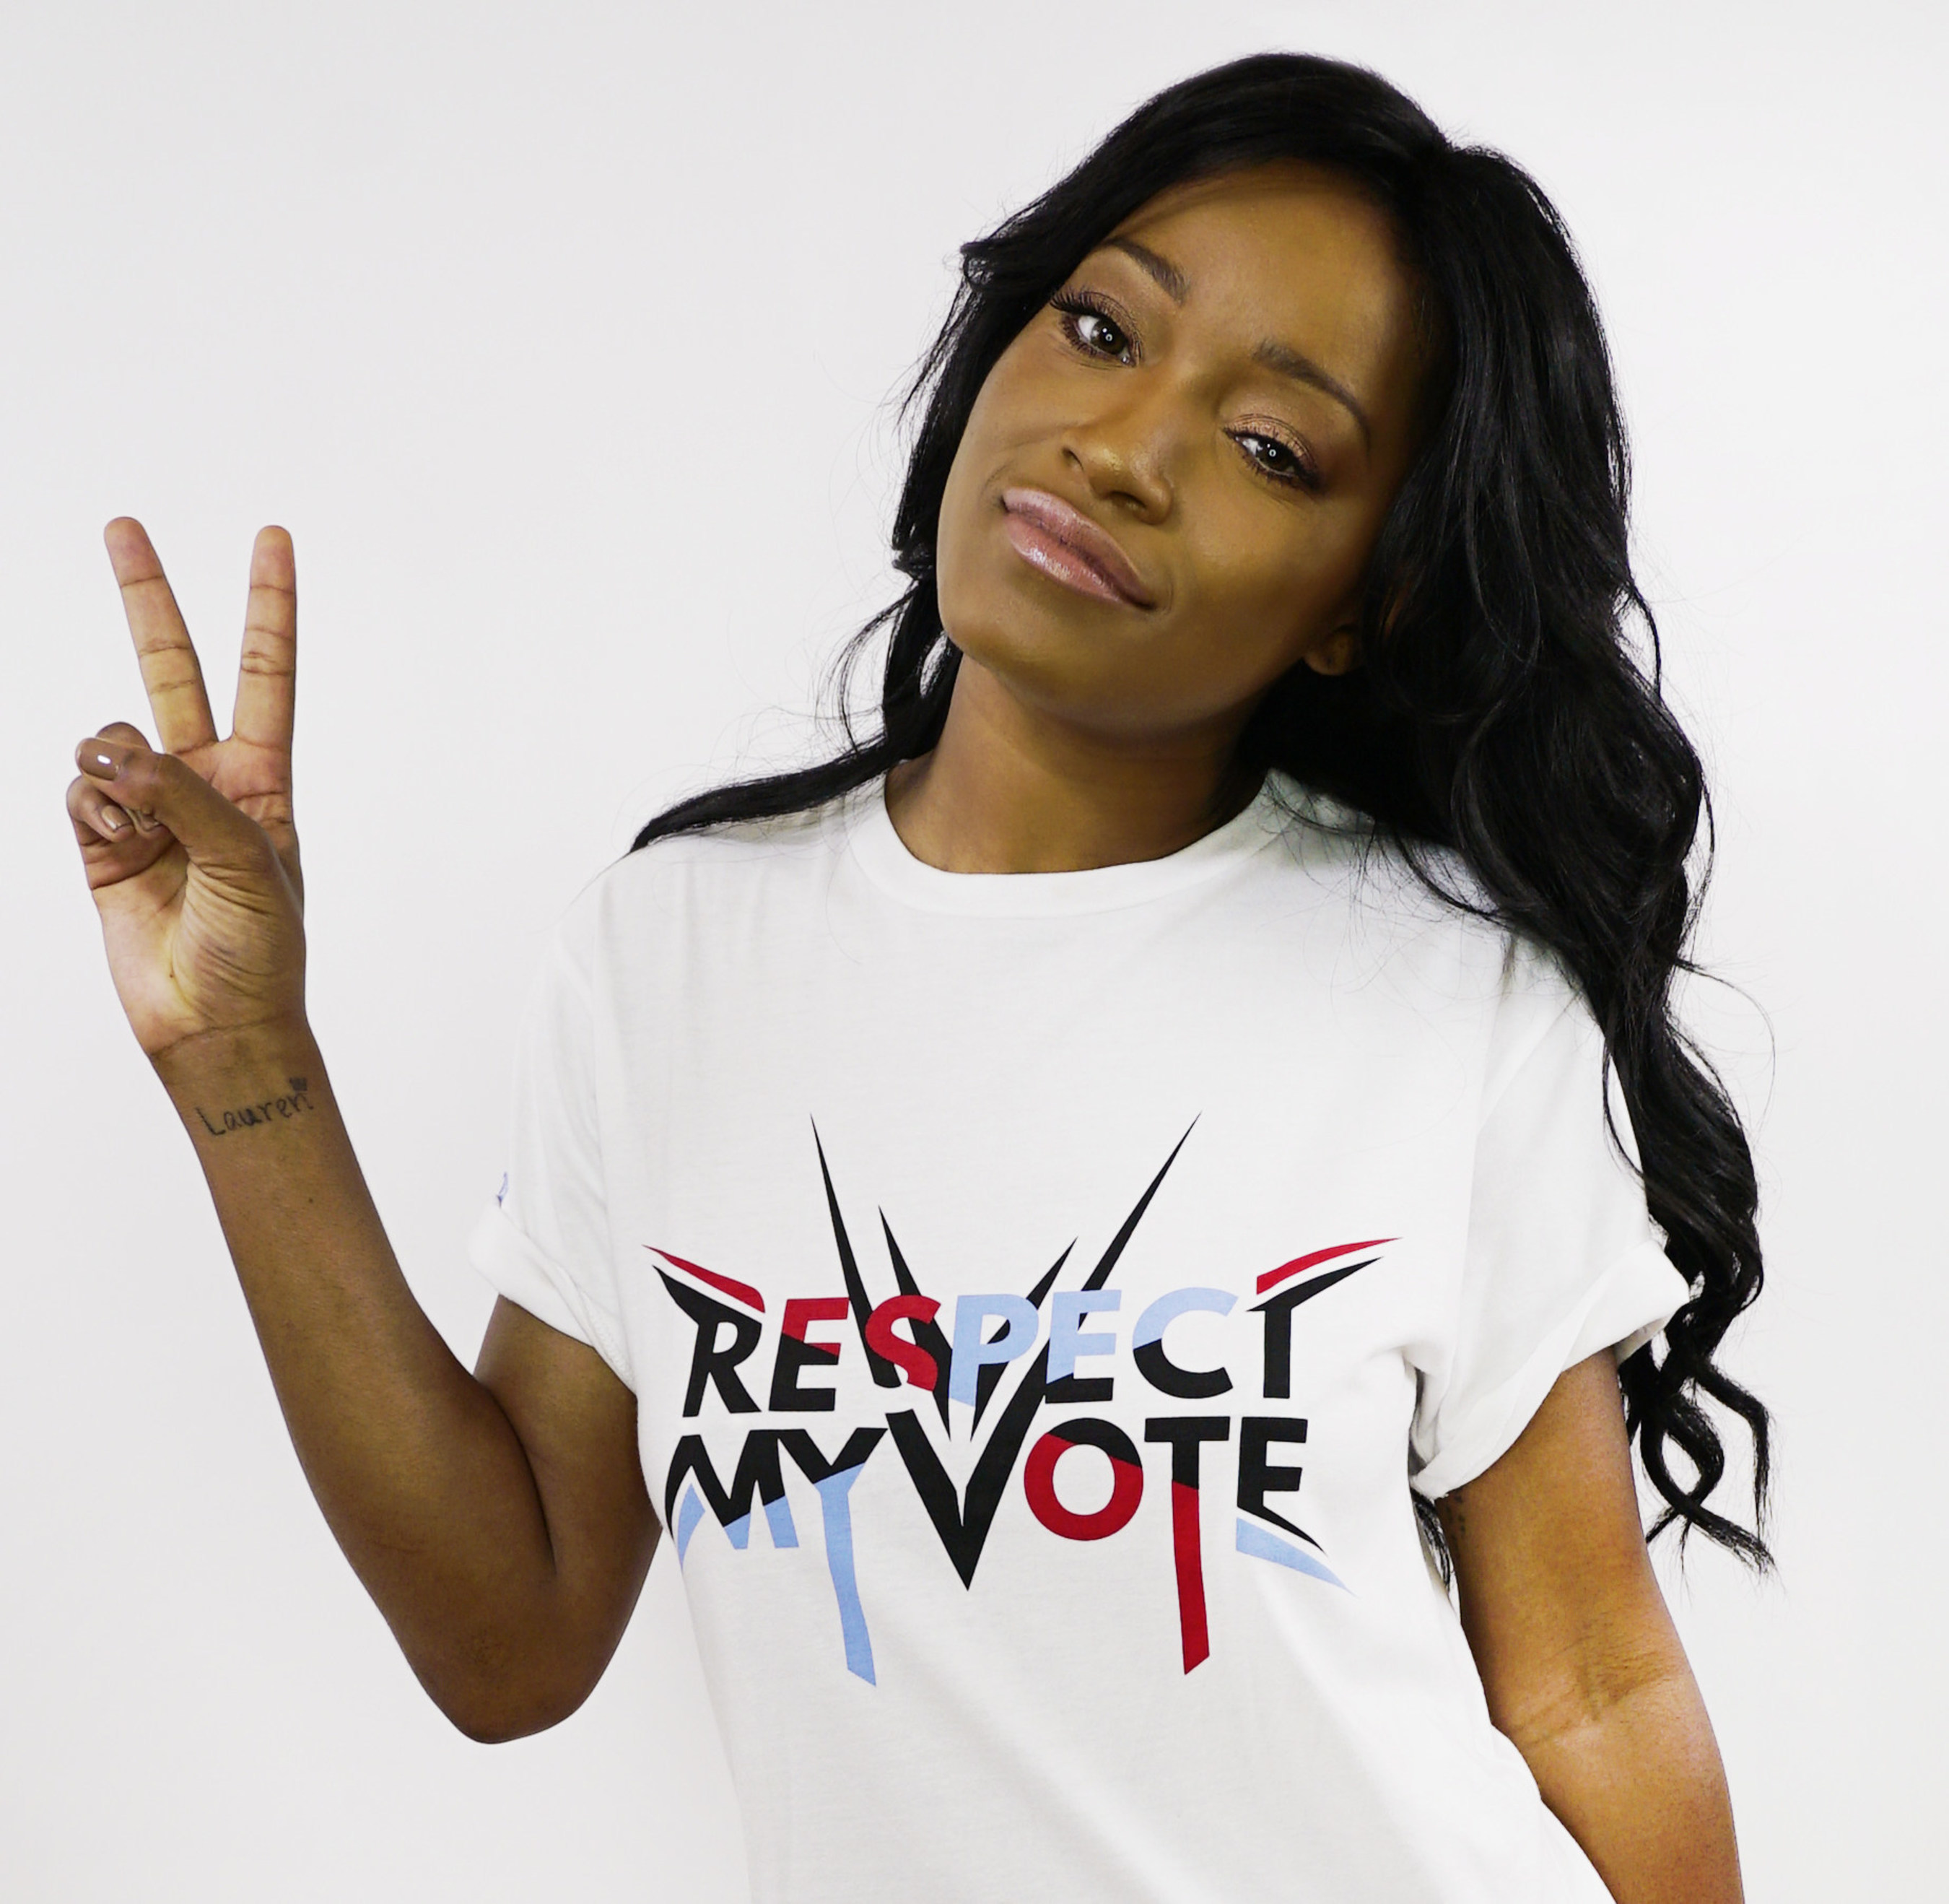 ACTRESS, SINGER AND TALK SHOW HOST KEKE PALMER ANNOUNCED AS SPOKESPERSON FOR THE HIP HOP CAUCUS RESPECT MY VOTE! CAMPAIGN Campaign Designed to Encourage Youth and Communities of Color to Force Change in their Communities through the Power of Voting